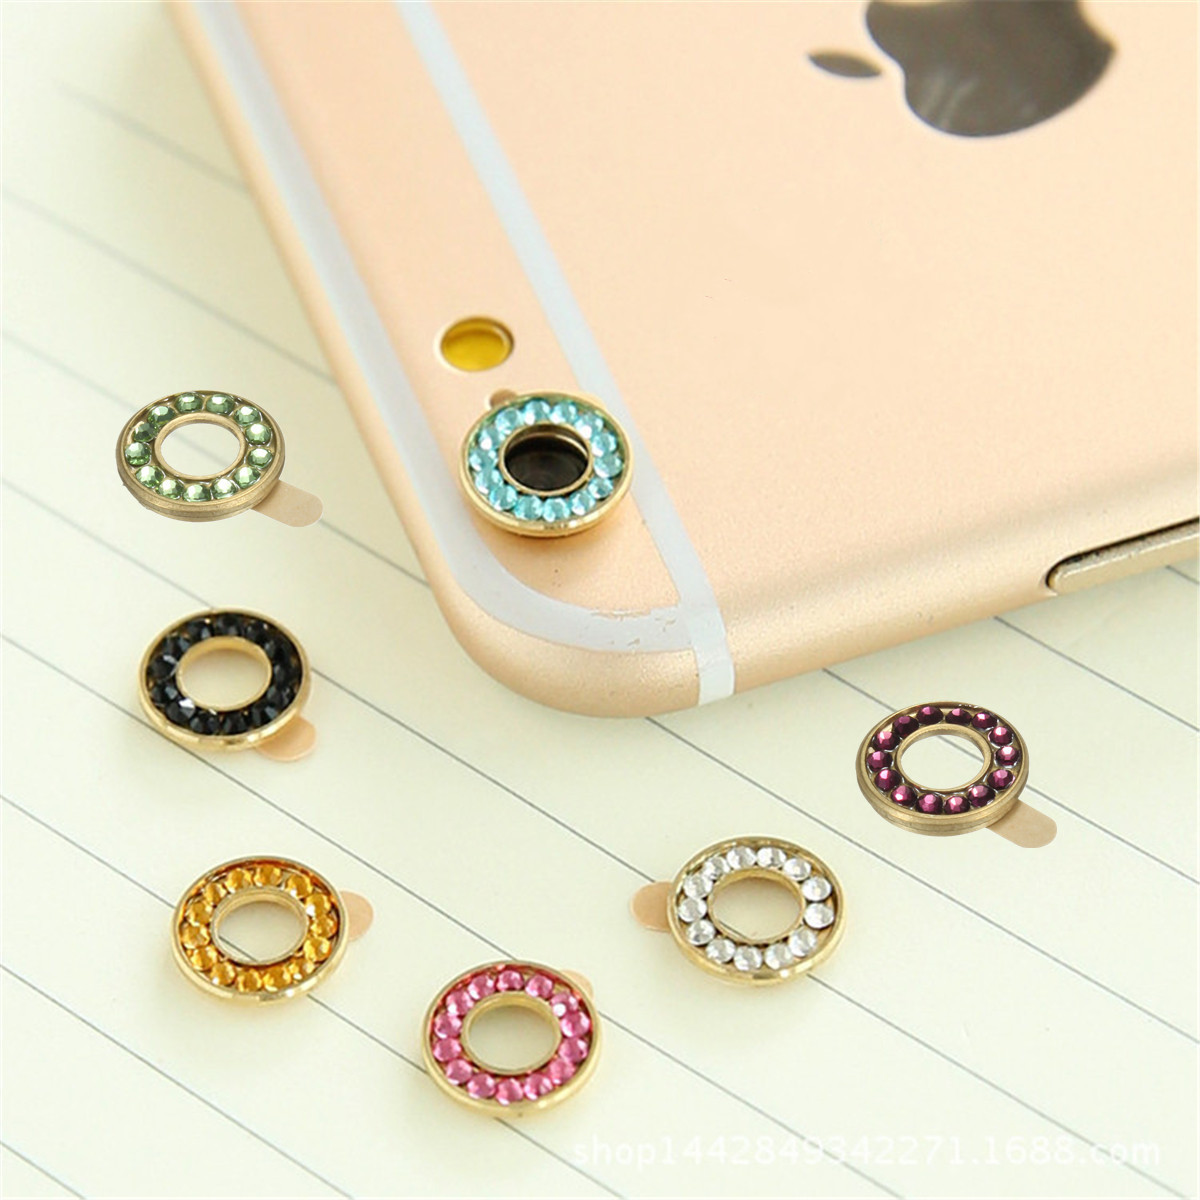 Crystal-Back-Camera-Metal-Lens-Protective-Ring-Circle-Cover-For-iPhone-6-6S-1070485